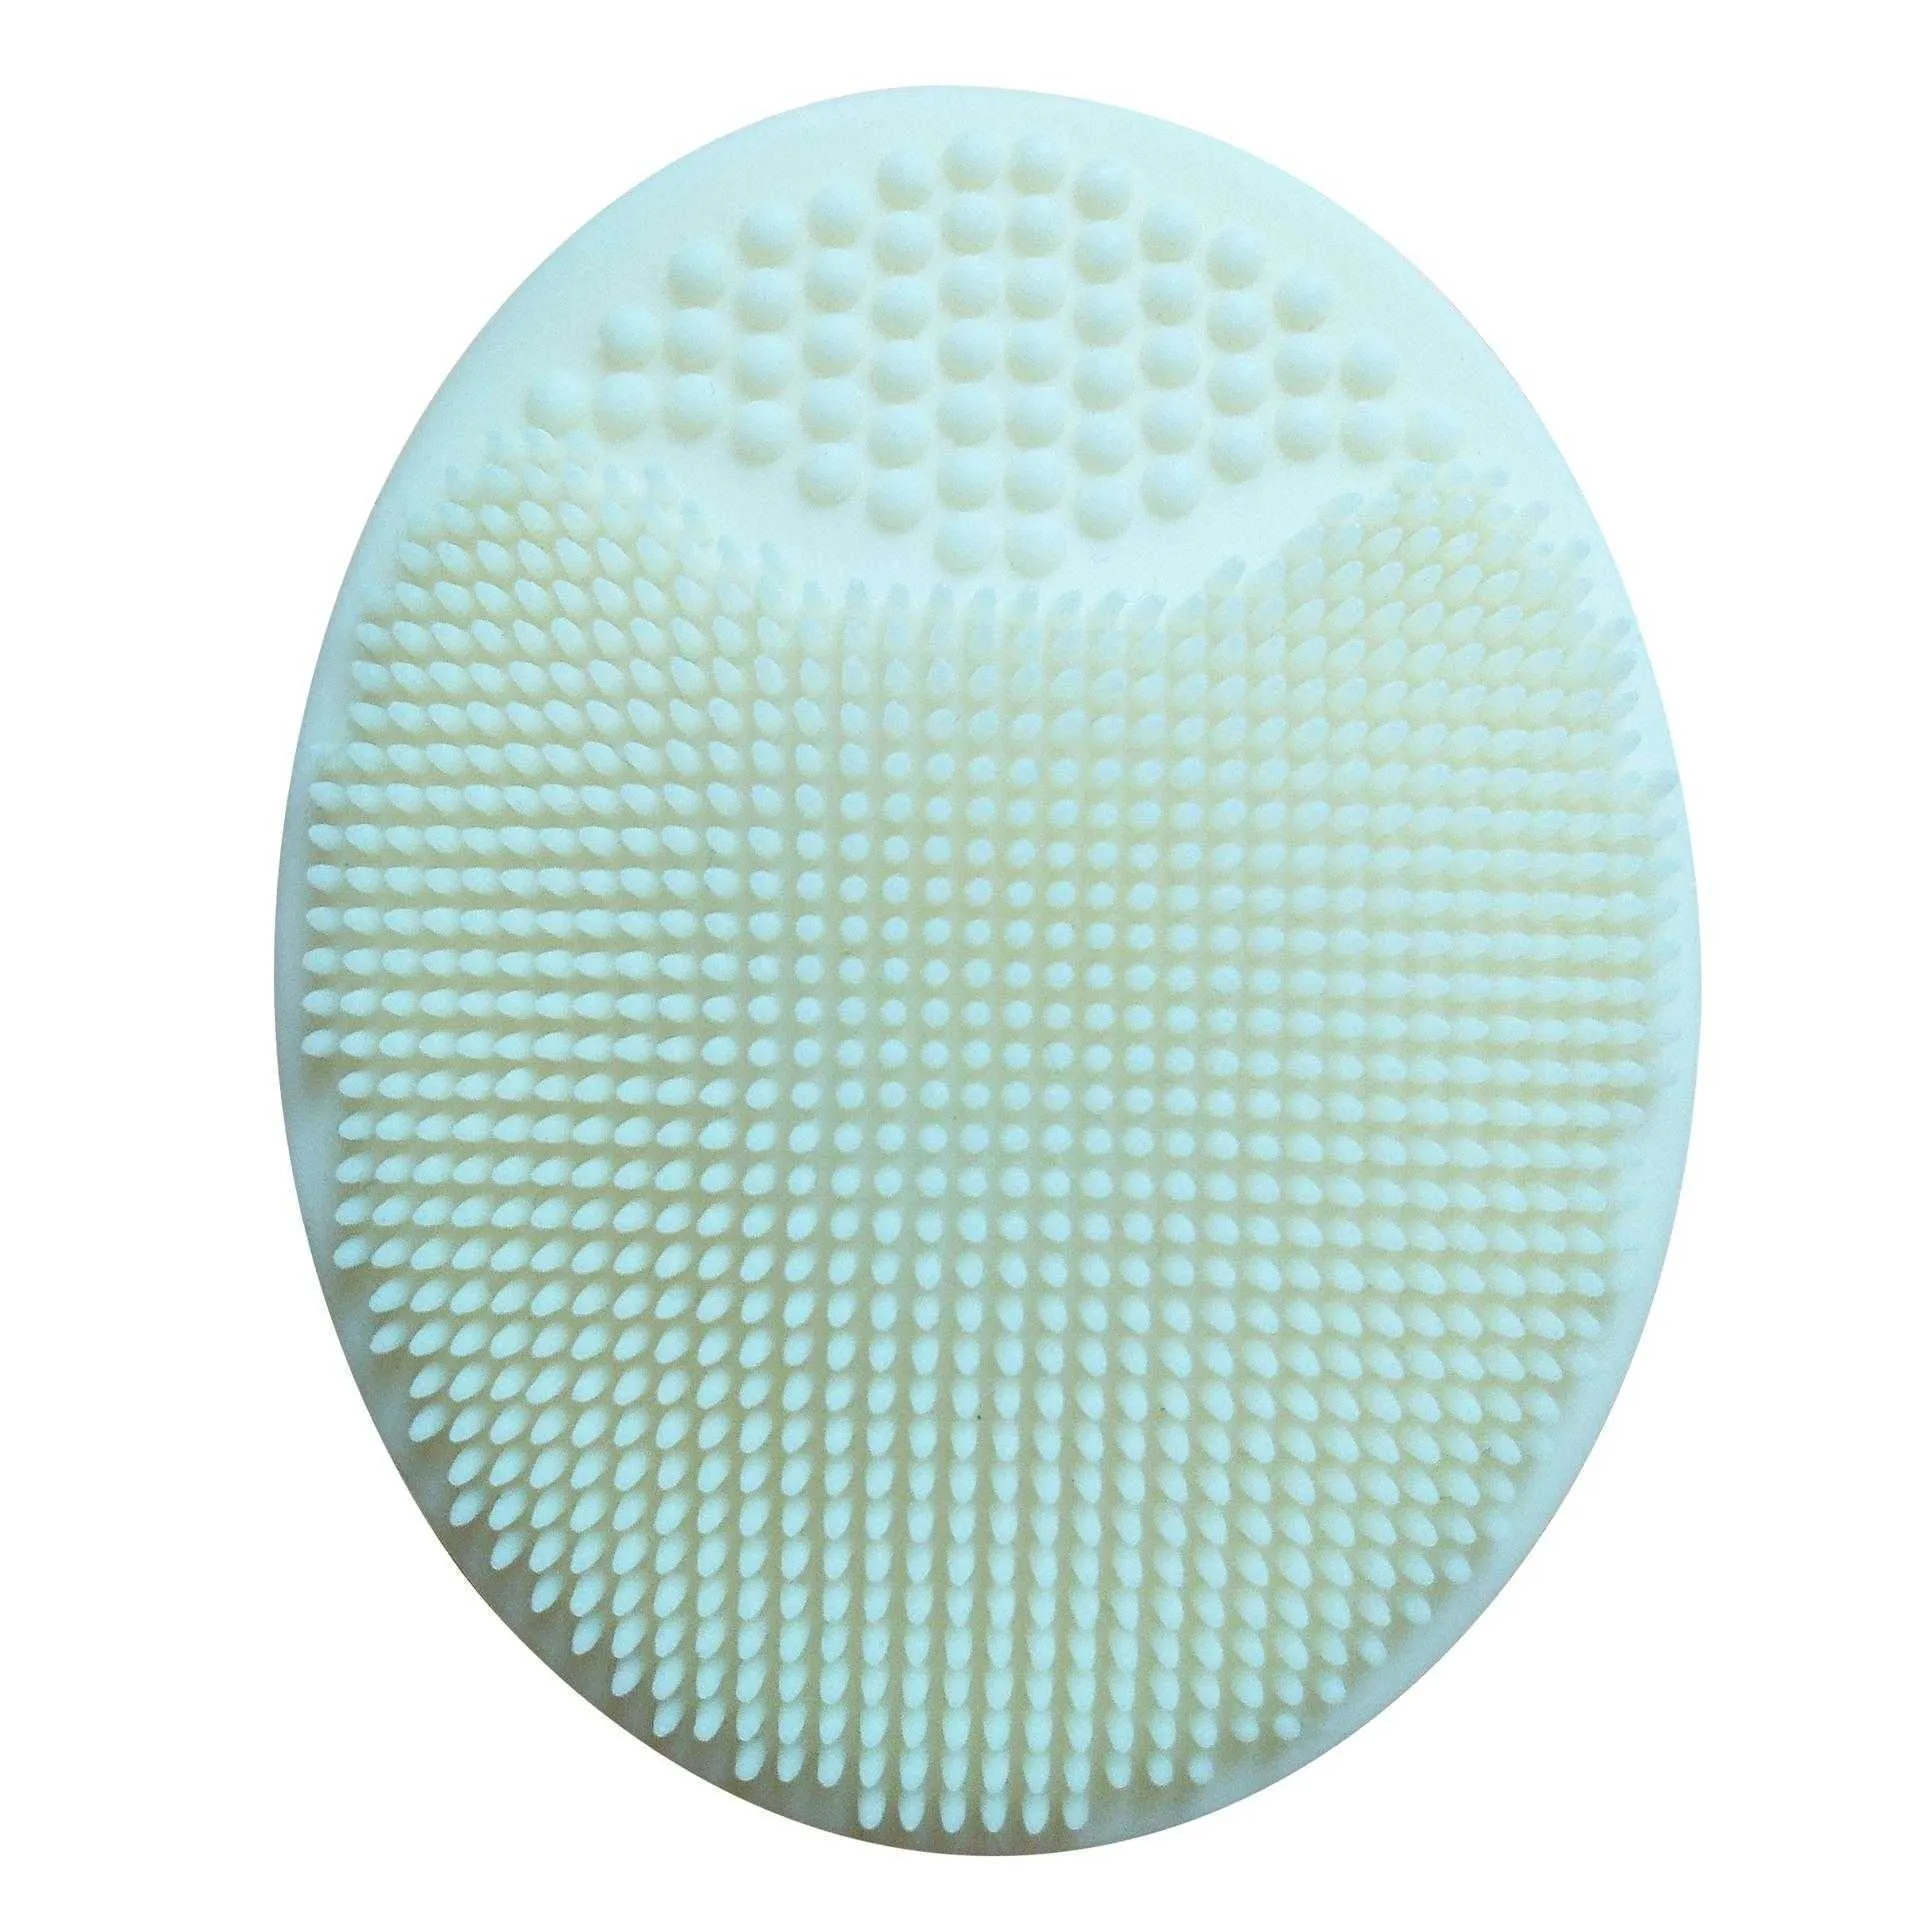 Soft silicone Cleaning Pad Wash Face Facial Exfoliating Brush SPA Skin Scrub Cleanser Tool ZWL315